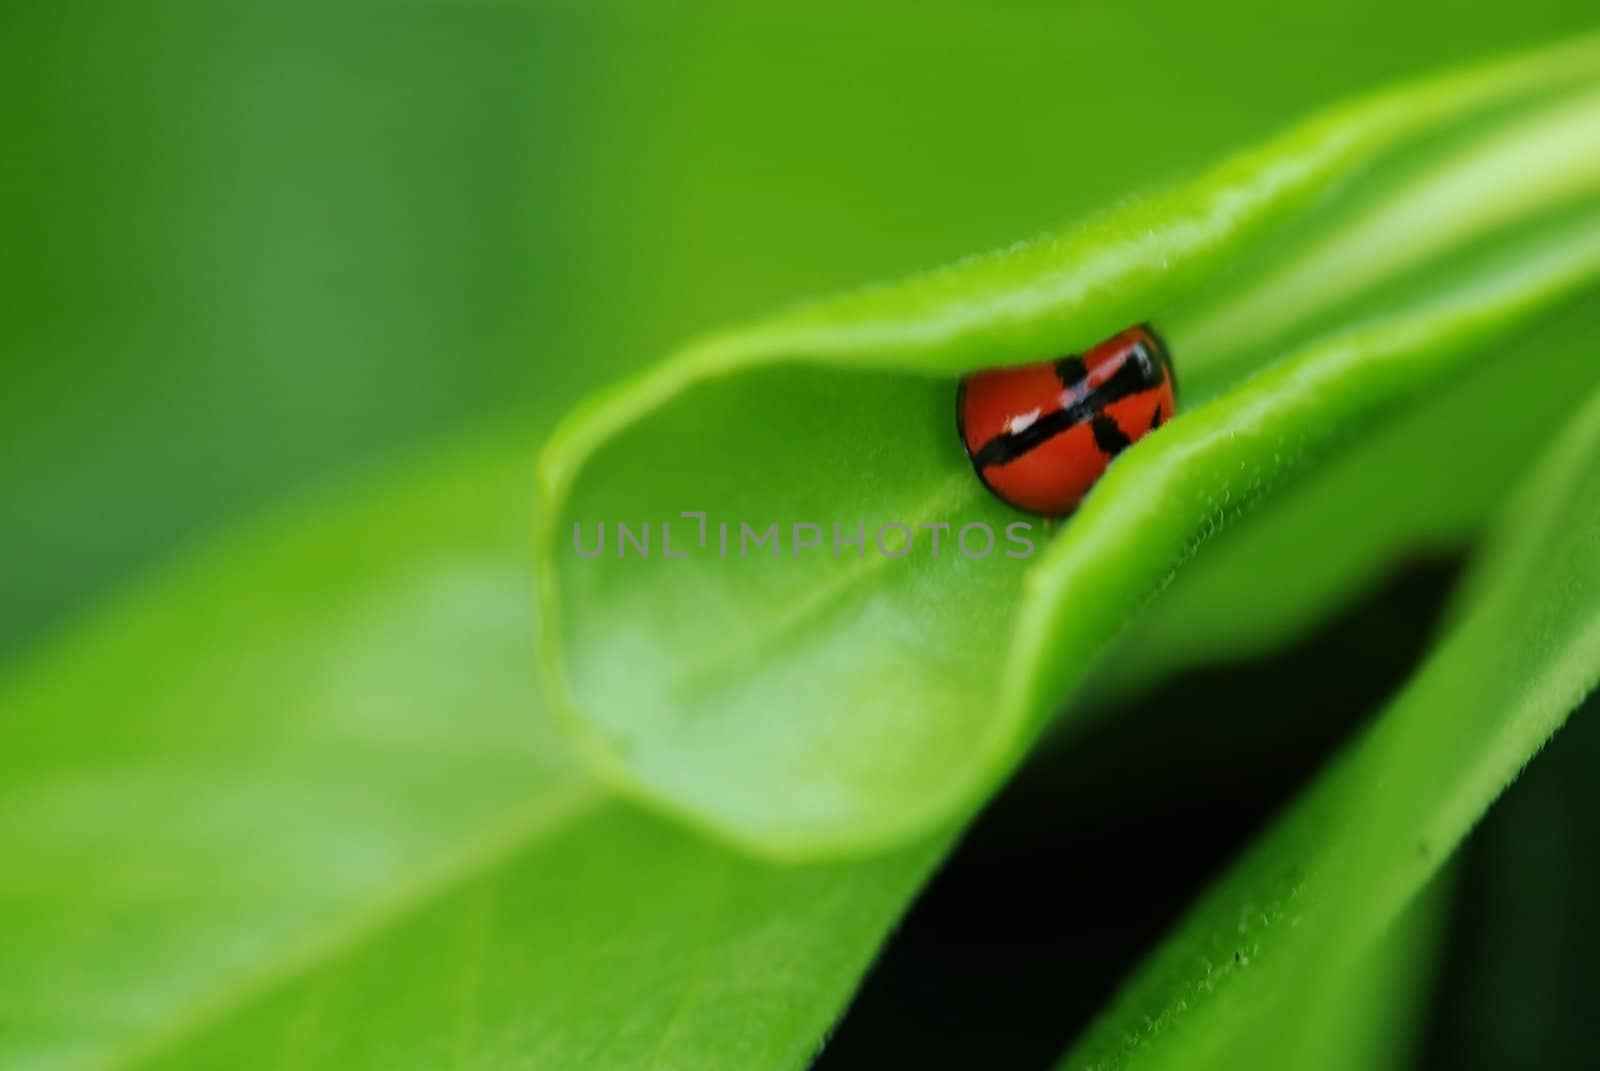 Small red ladybug hiding in curled leaves